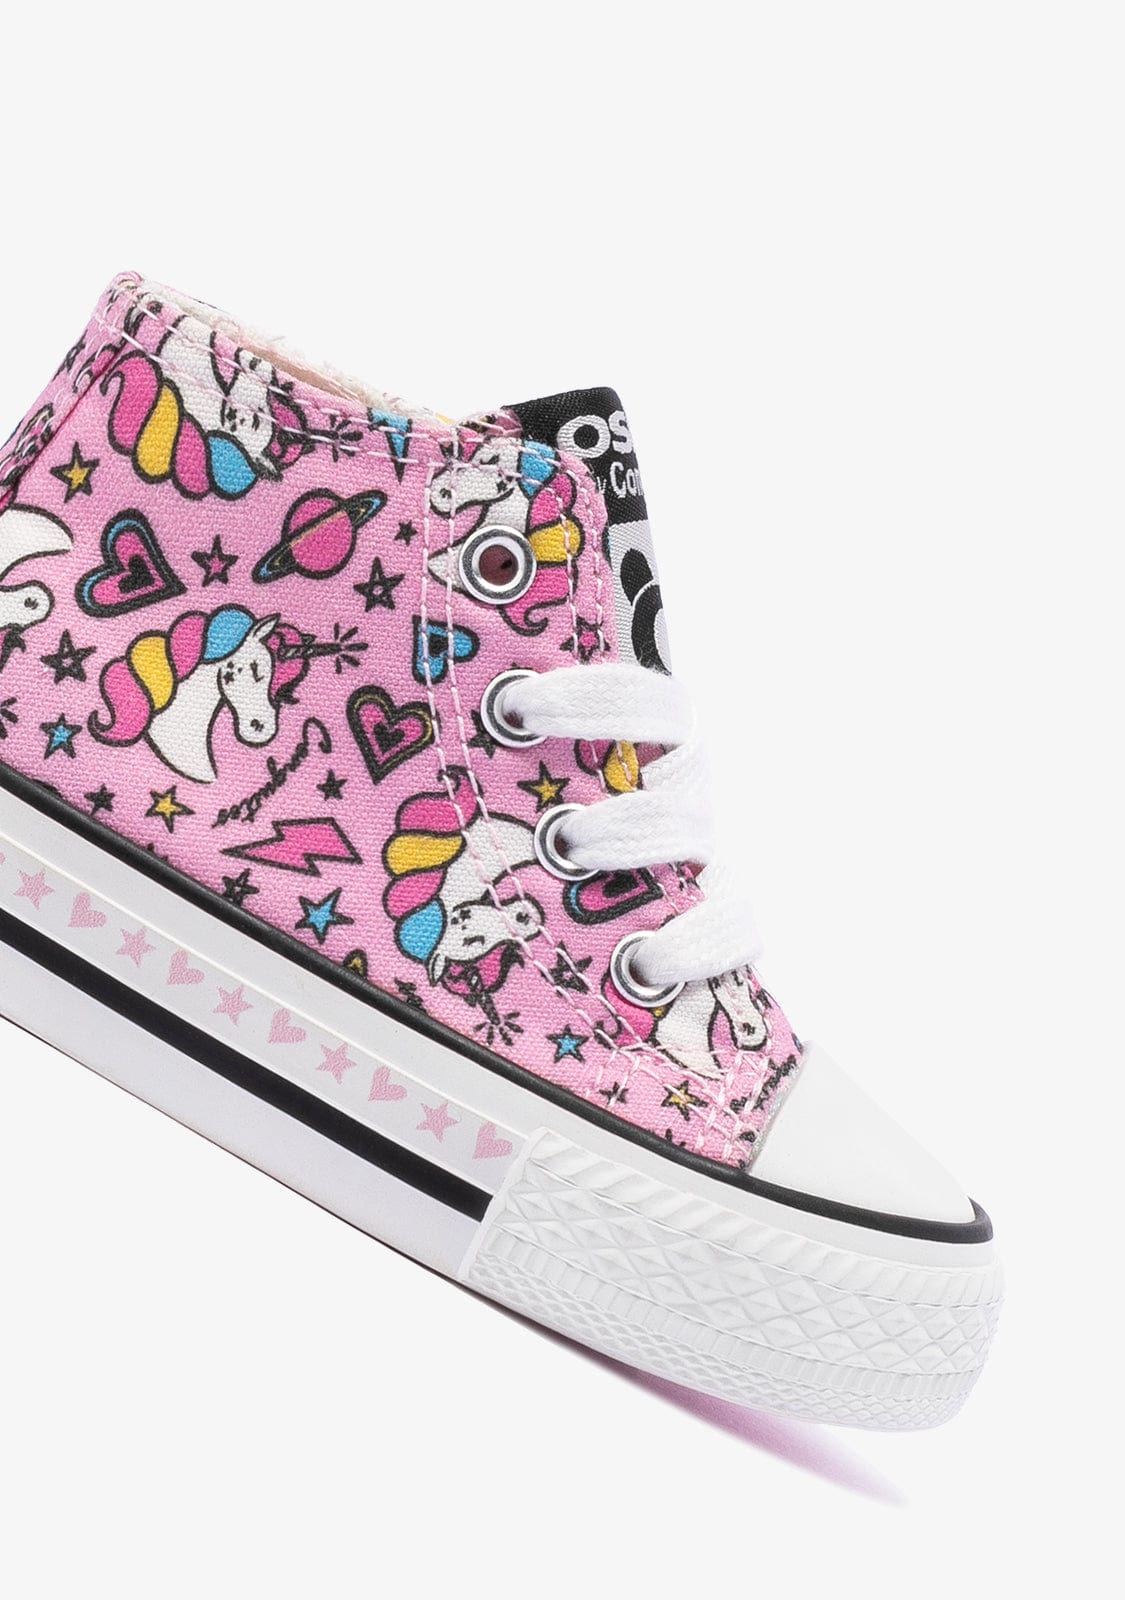 OSITO Shoes Baby's Pink Unicorn Hi-Top Sneakers Canvas